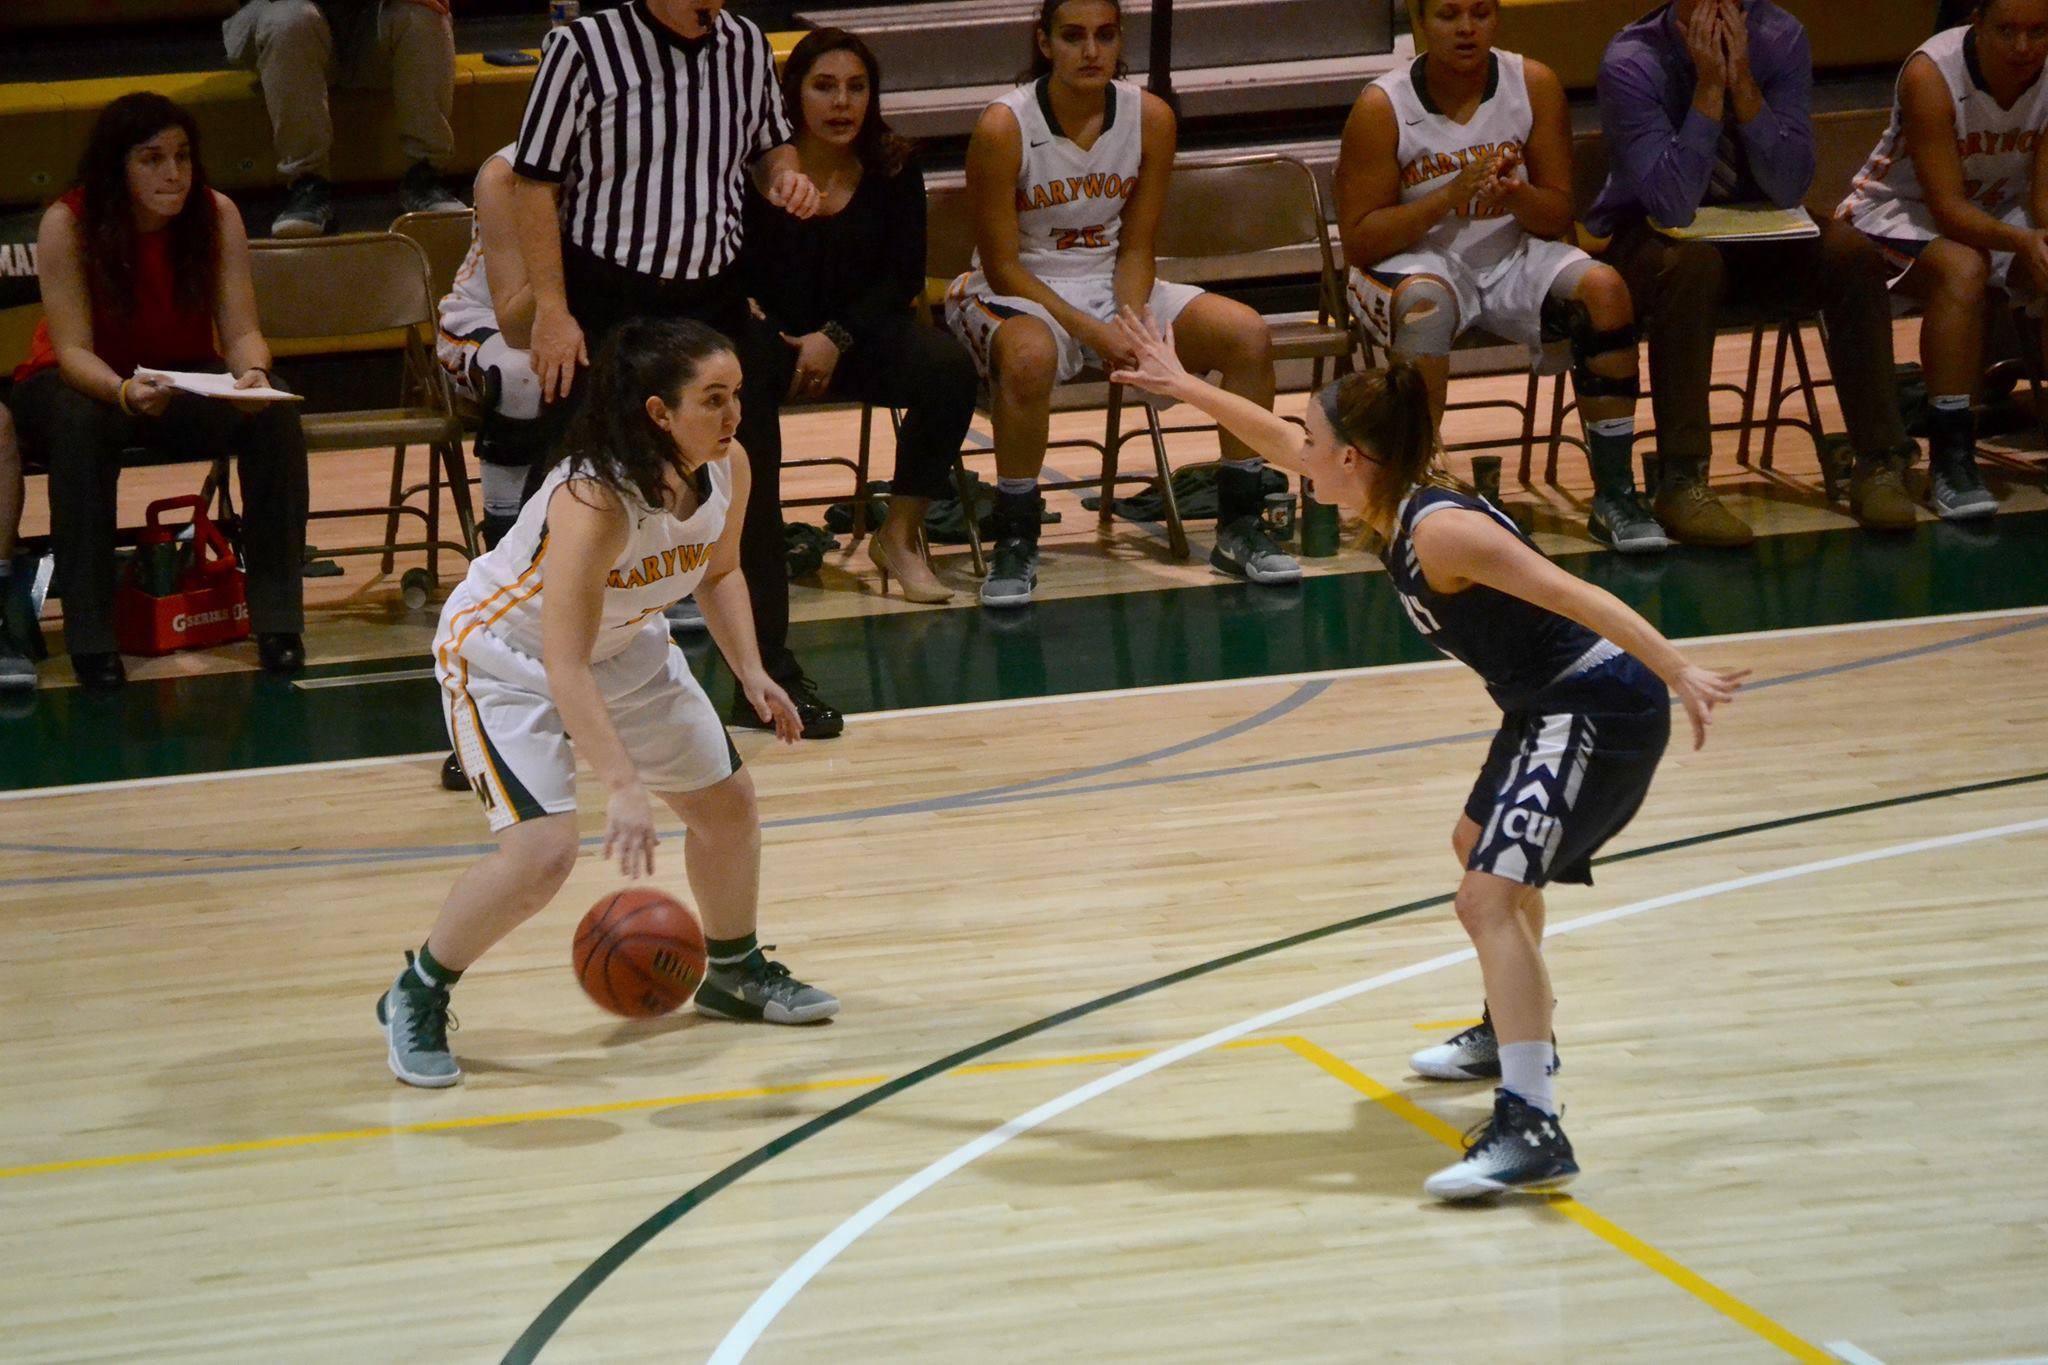 Marywood junior guard Lisa Steakin looks for an open shot in a 63-66 home opener loss to Centenary University.